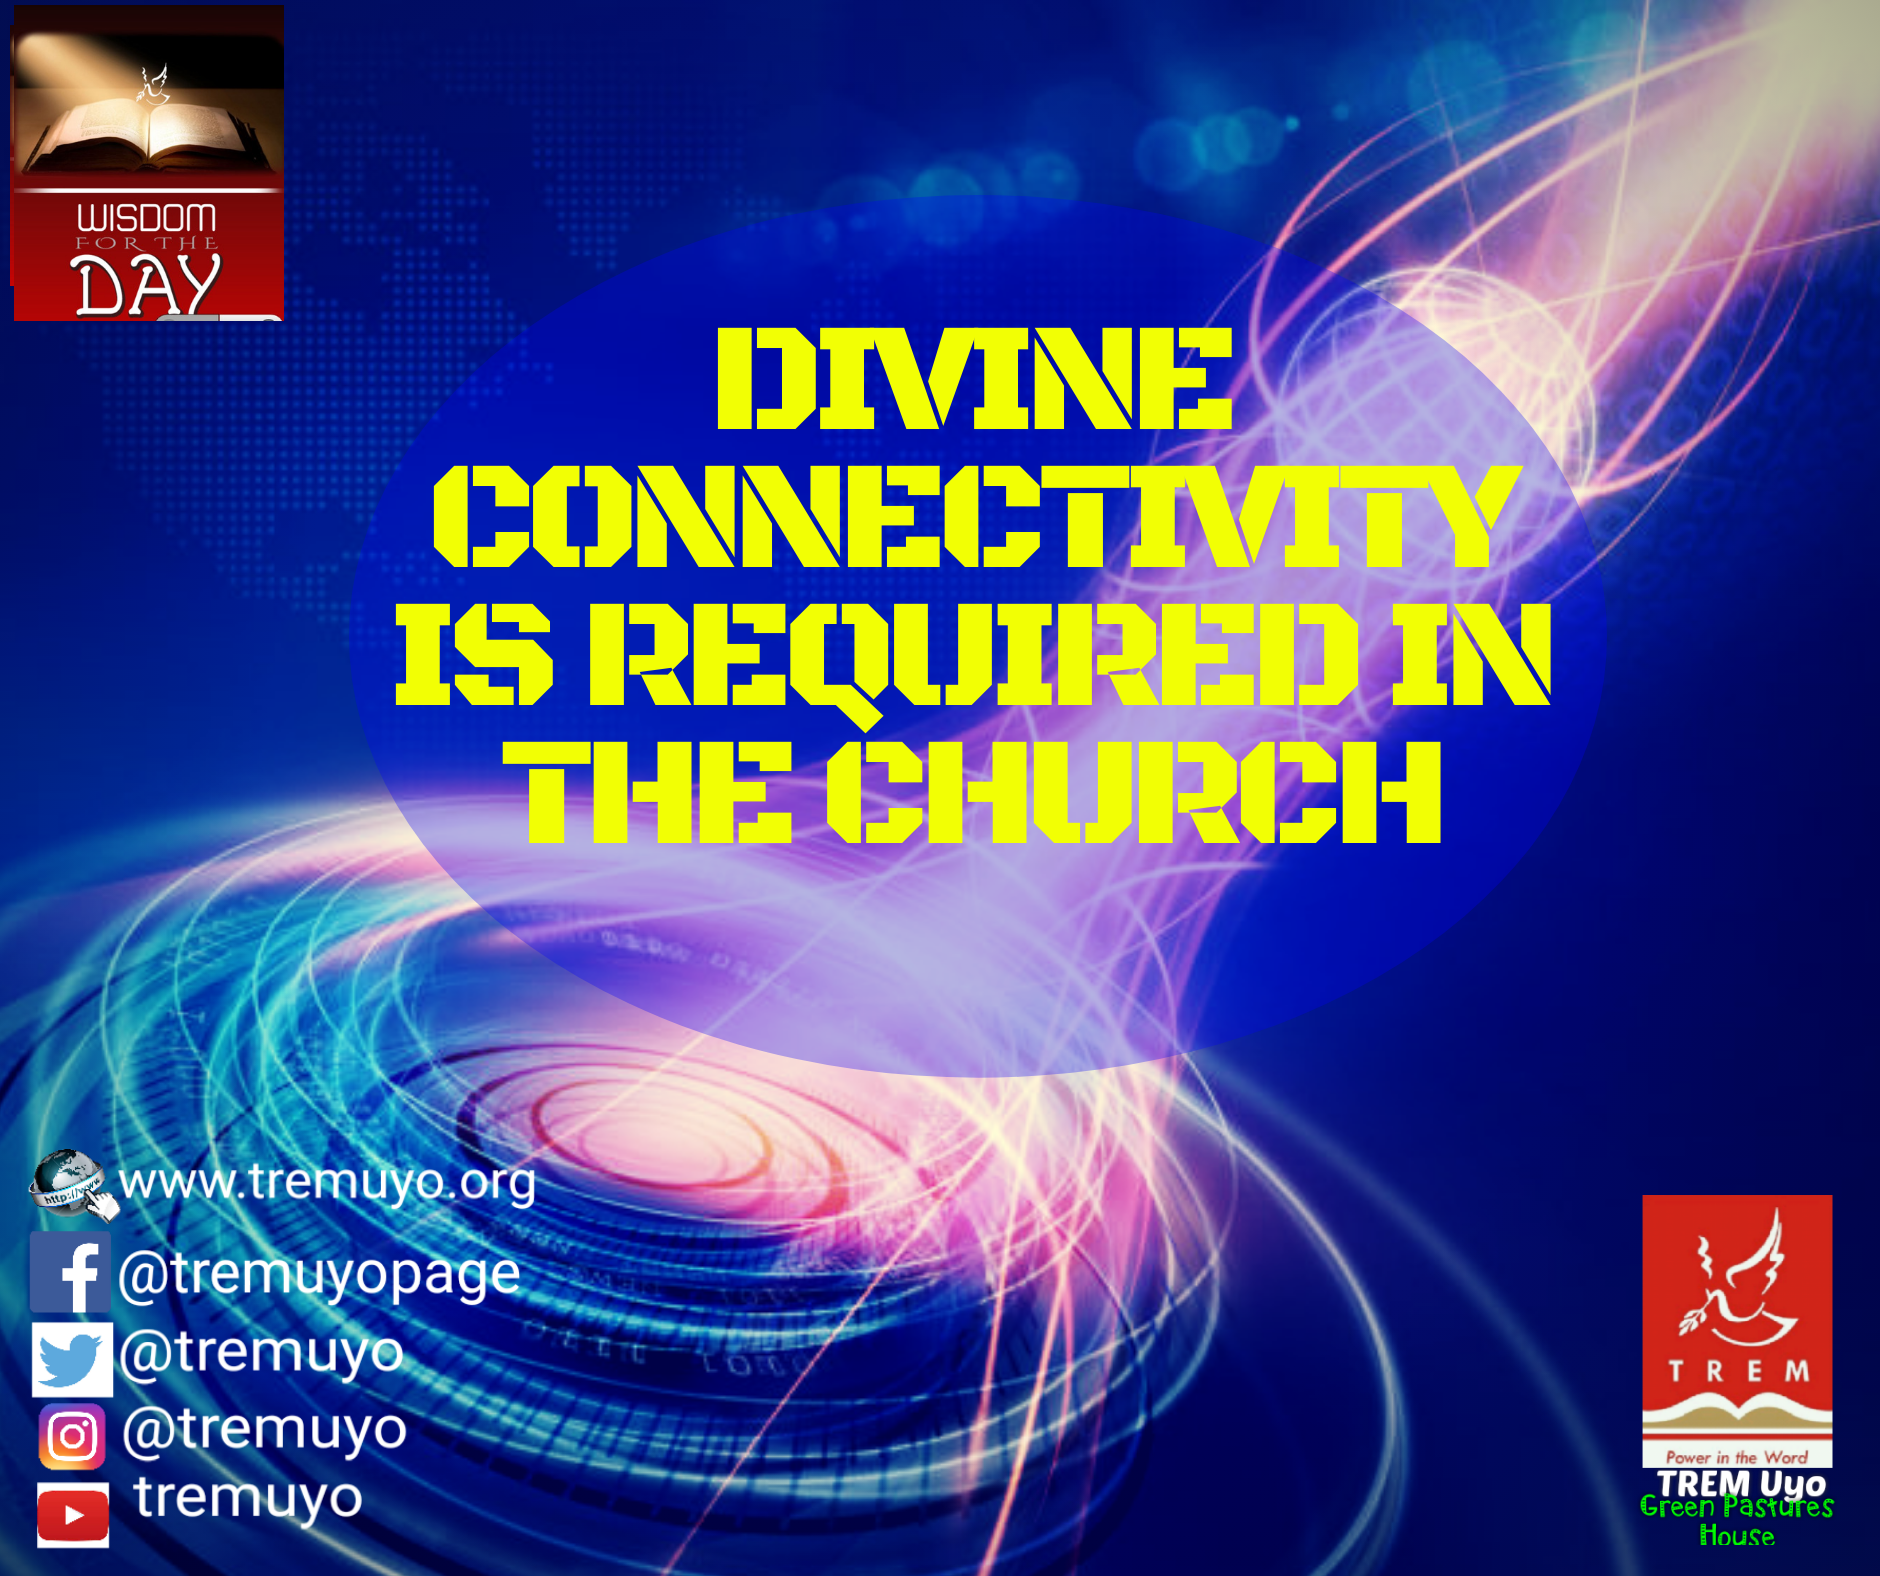 DIVINE CONNECTIVITY IS REQUIRED IN THE CHURCH